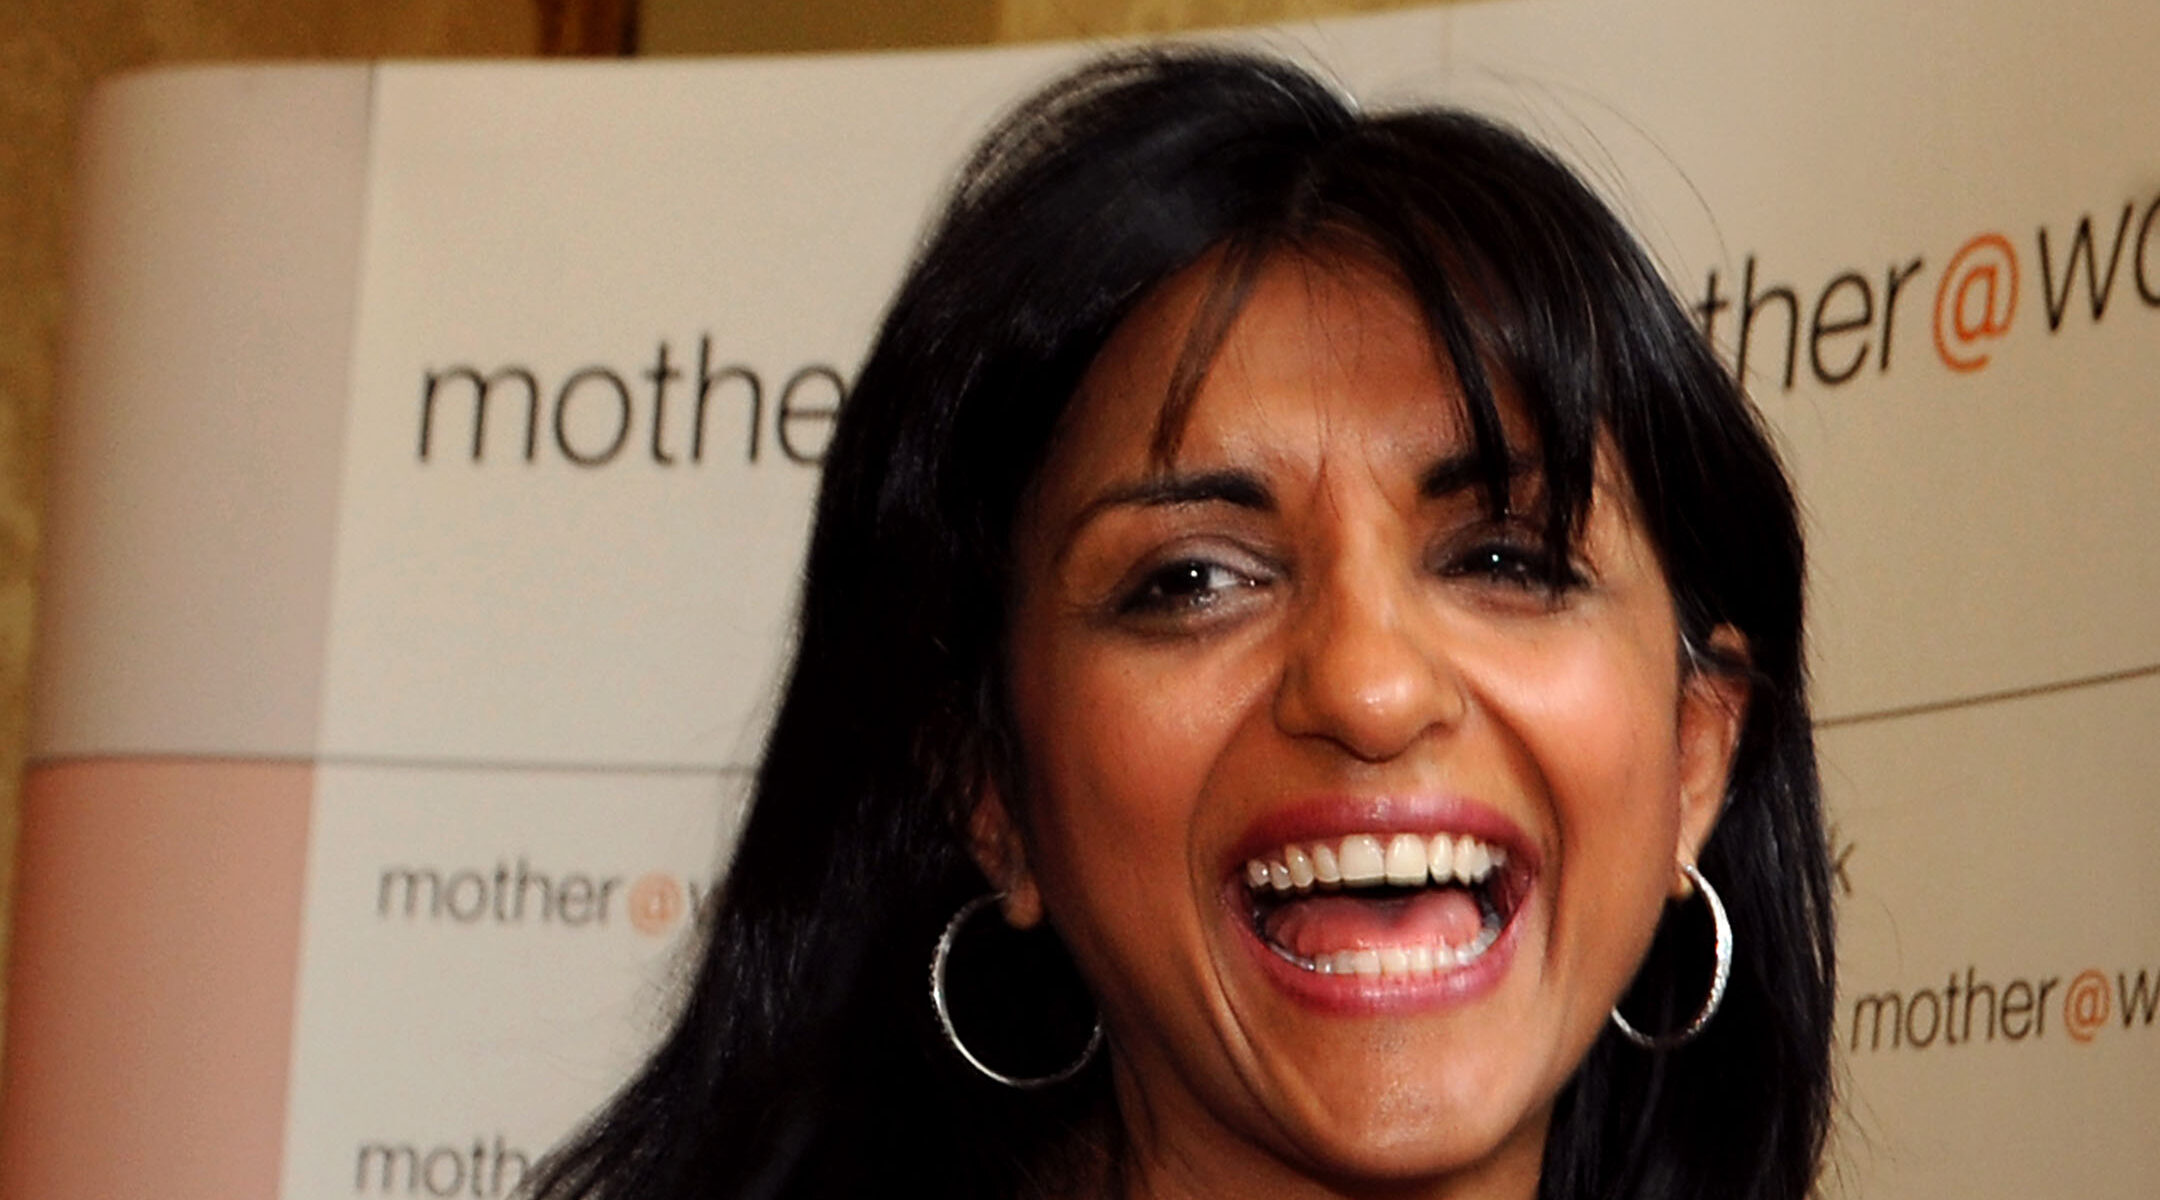 Geeta Sidhu-Robbat attends an awards ceremony in London, U.K. on June 17, 2008. (Fiona Hanson - PA Images via Getty Images)